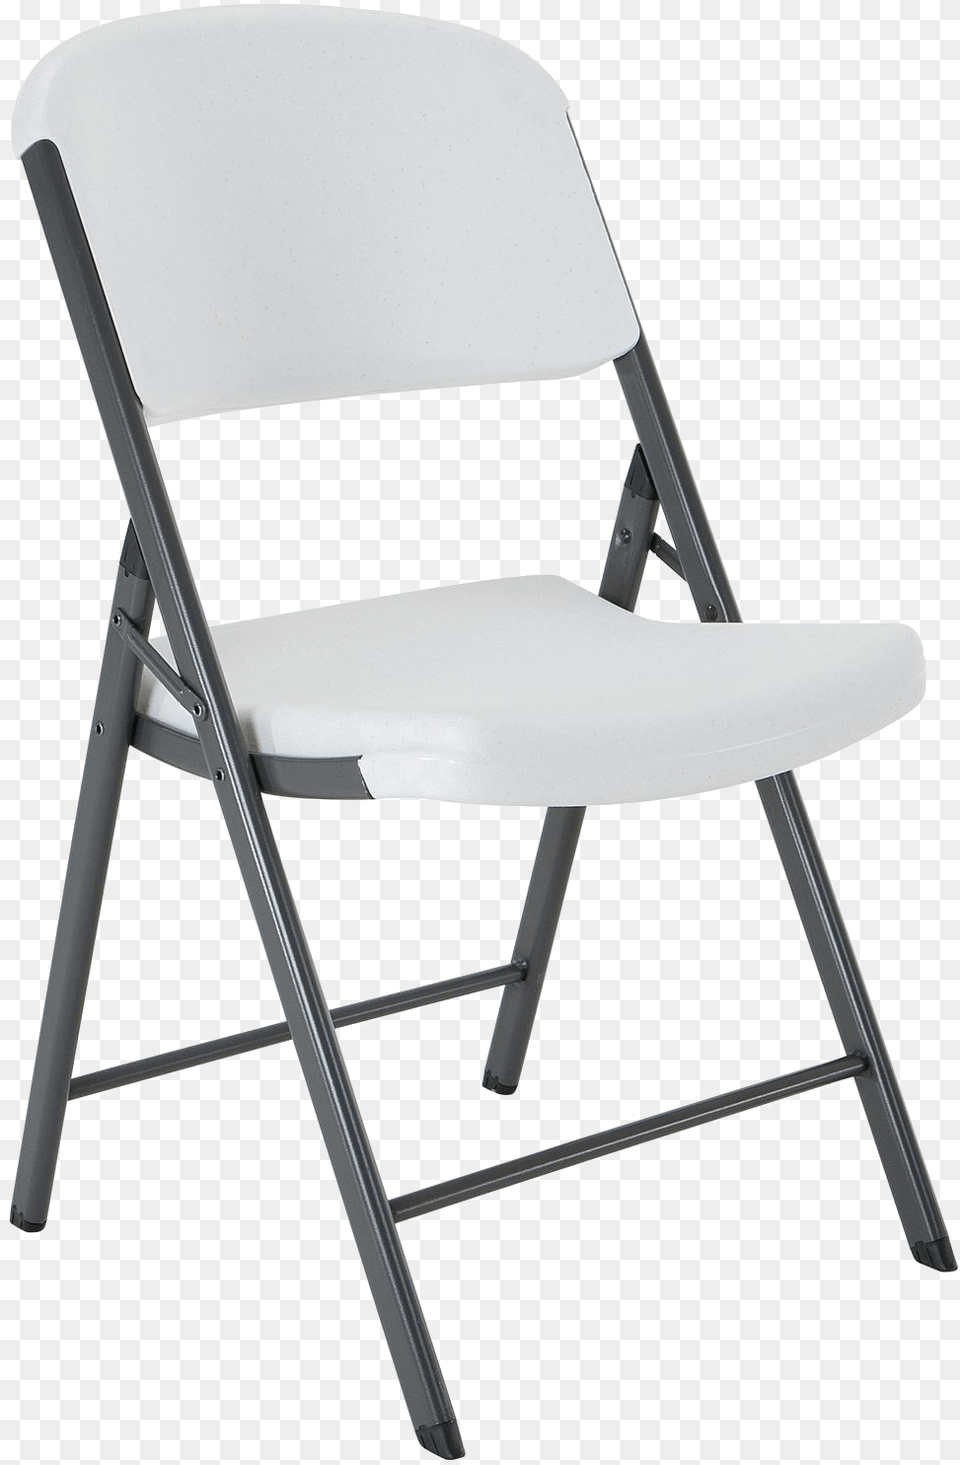 Folding Chair File White Granite Folding Chairs, Canvas, Furniture Free Transparent Png